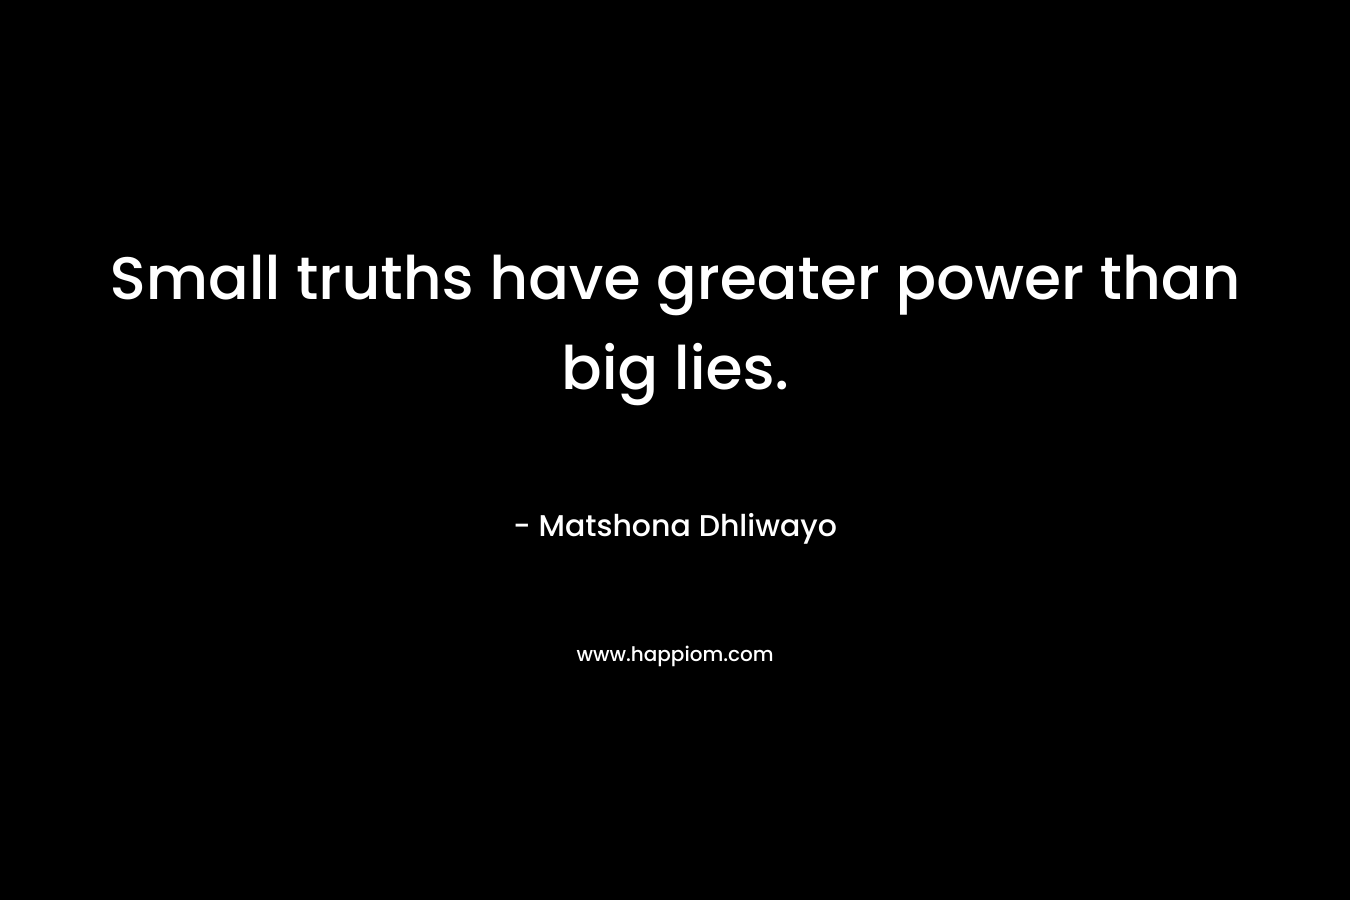 Small truths have greater power than big lies.